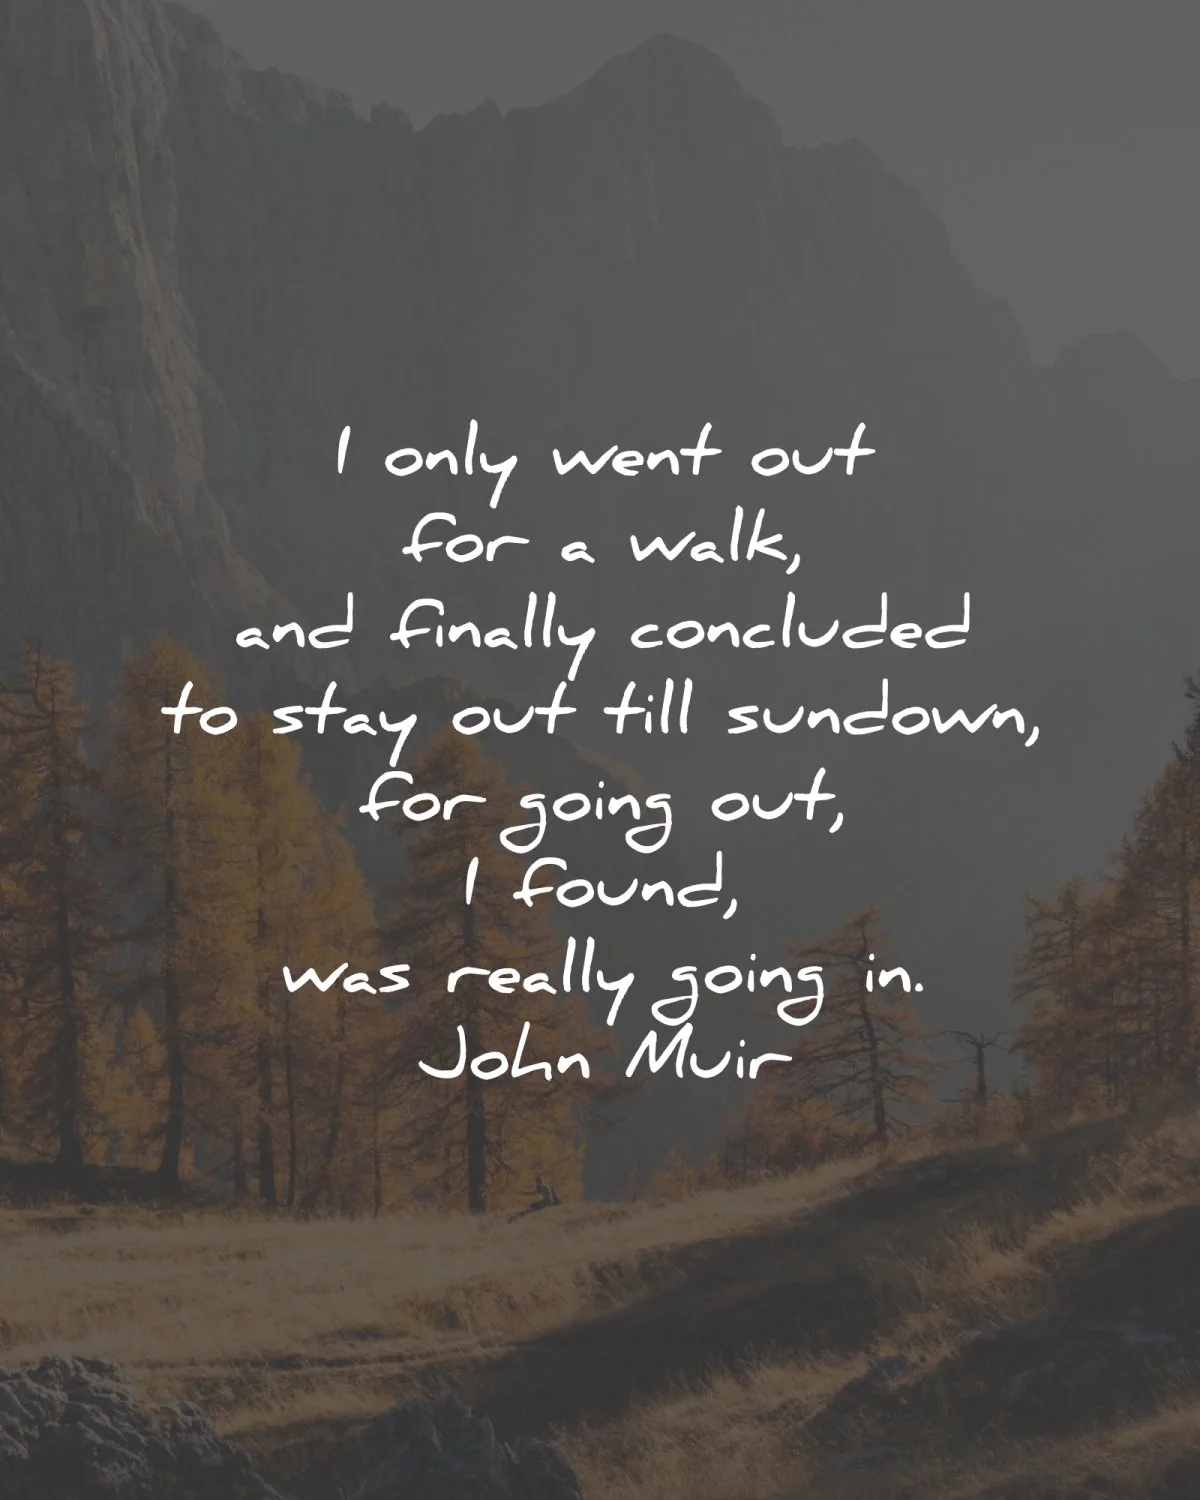 john muir quotes went out walk concluded sundown wisdom